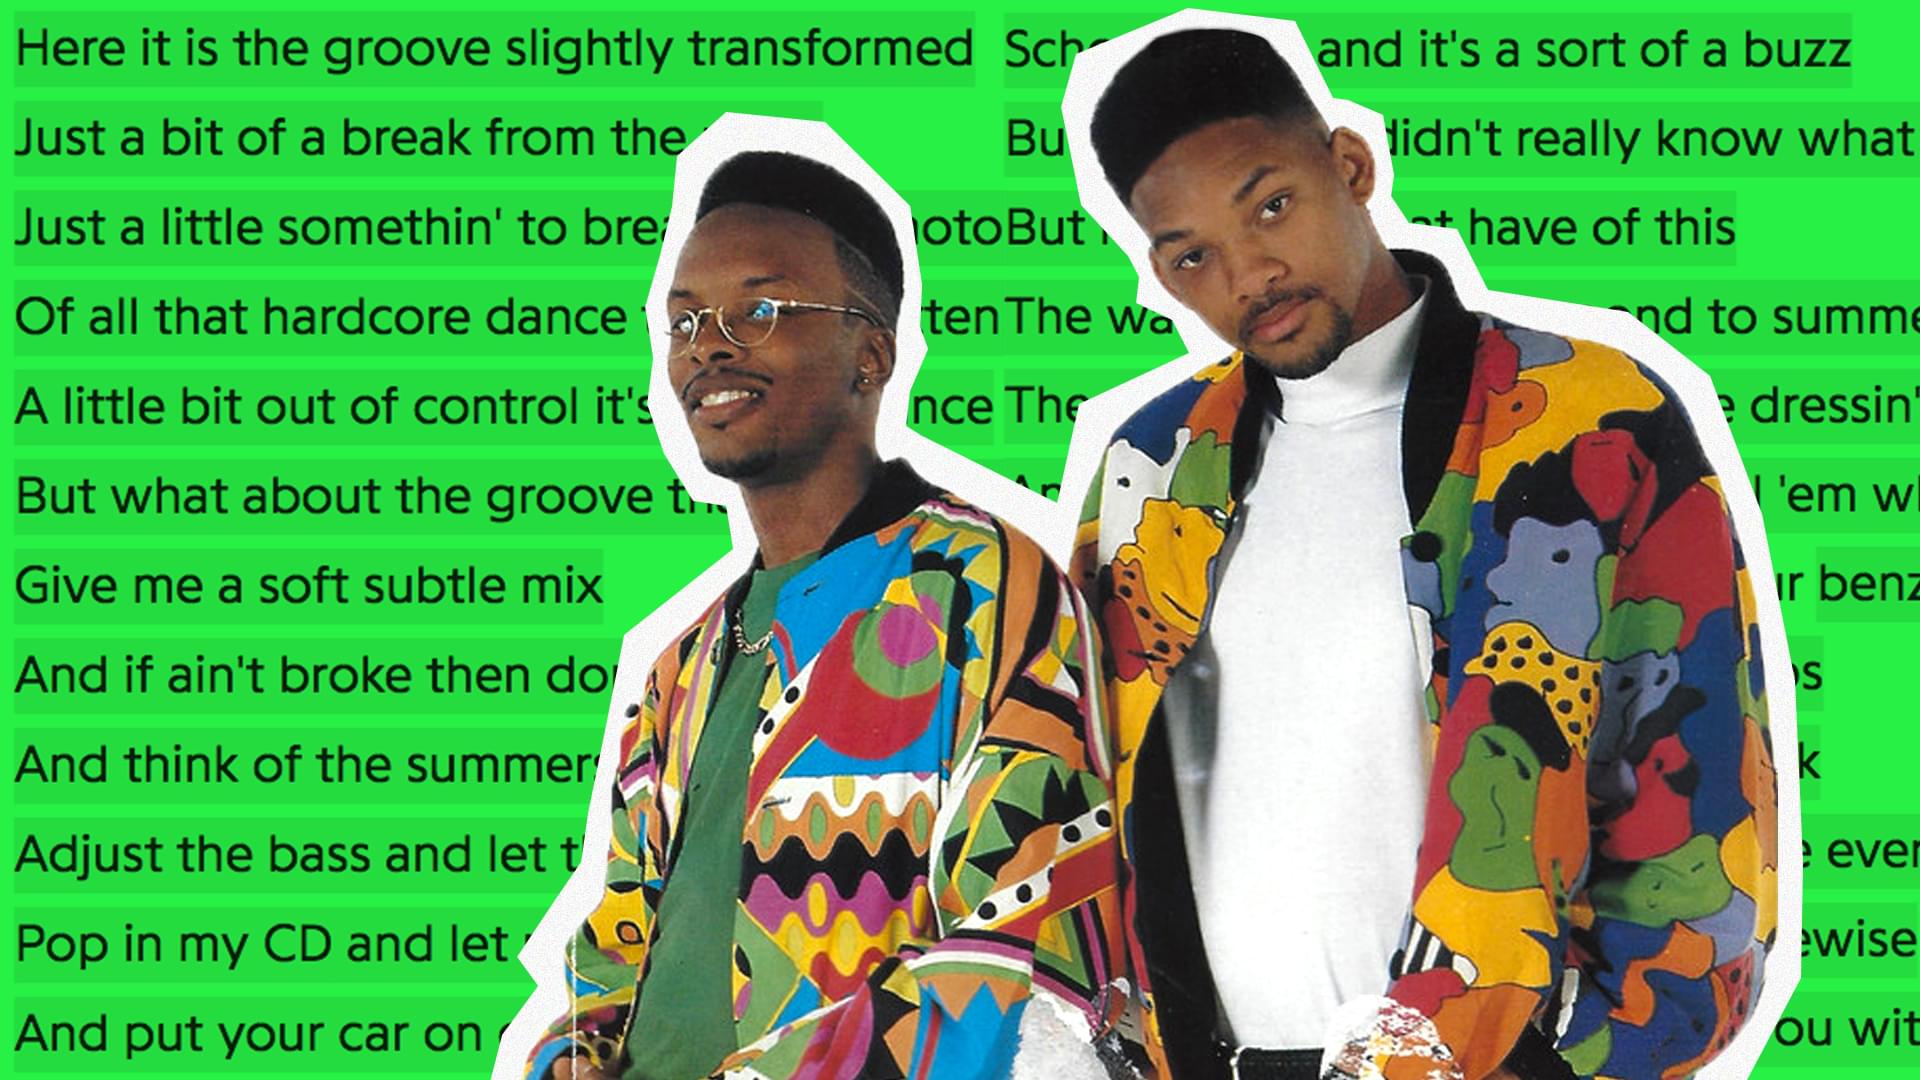 Fresh Prince Of Bel Air Jazz And Will - HD Wallpaper 